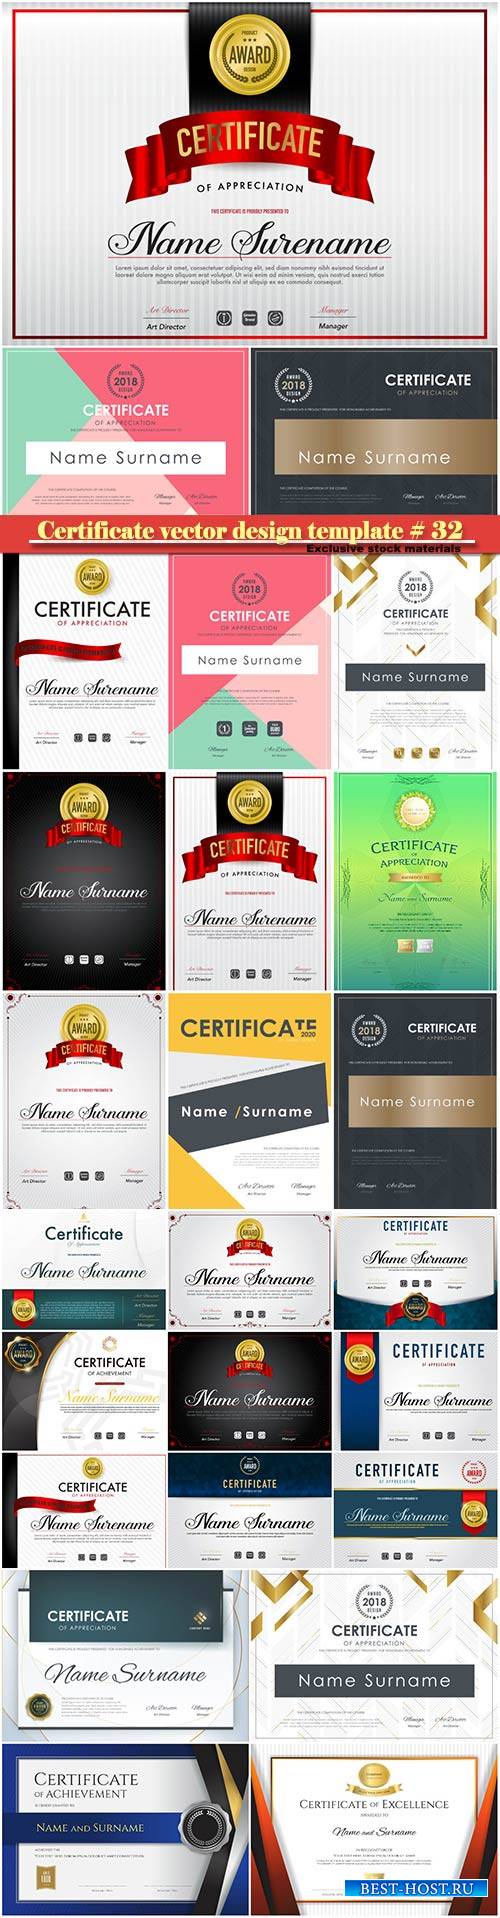 Certificate and vector diploma design template # 32